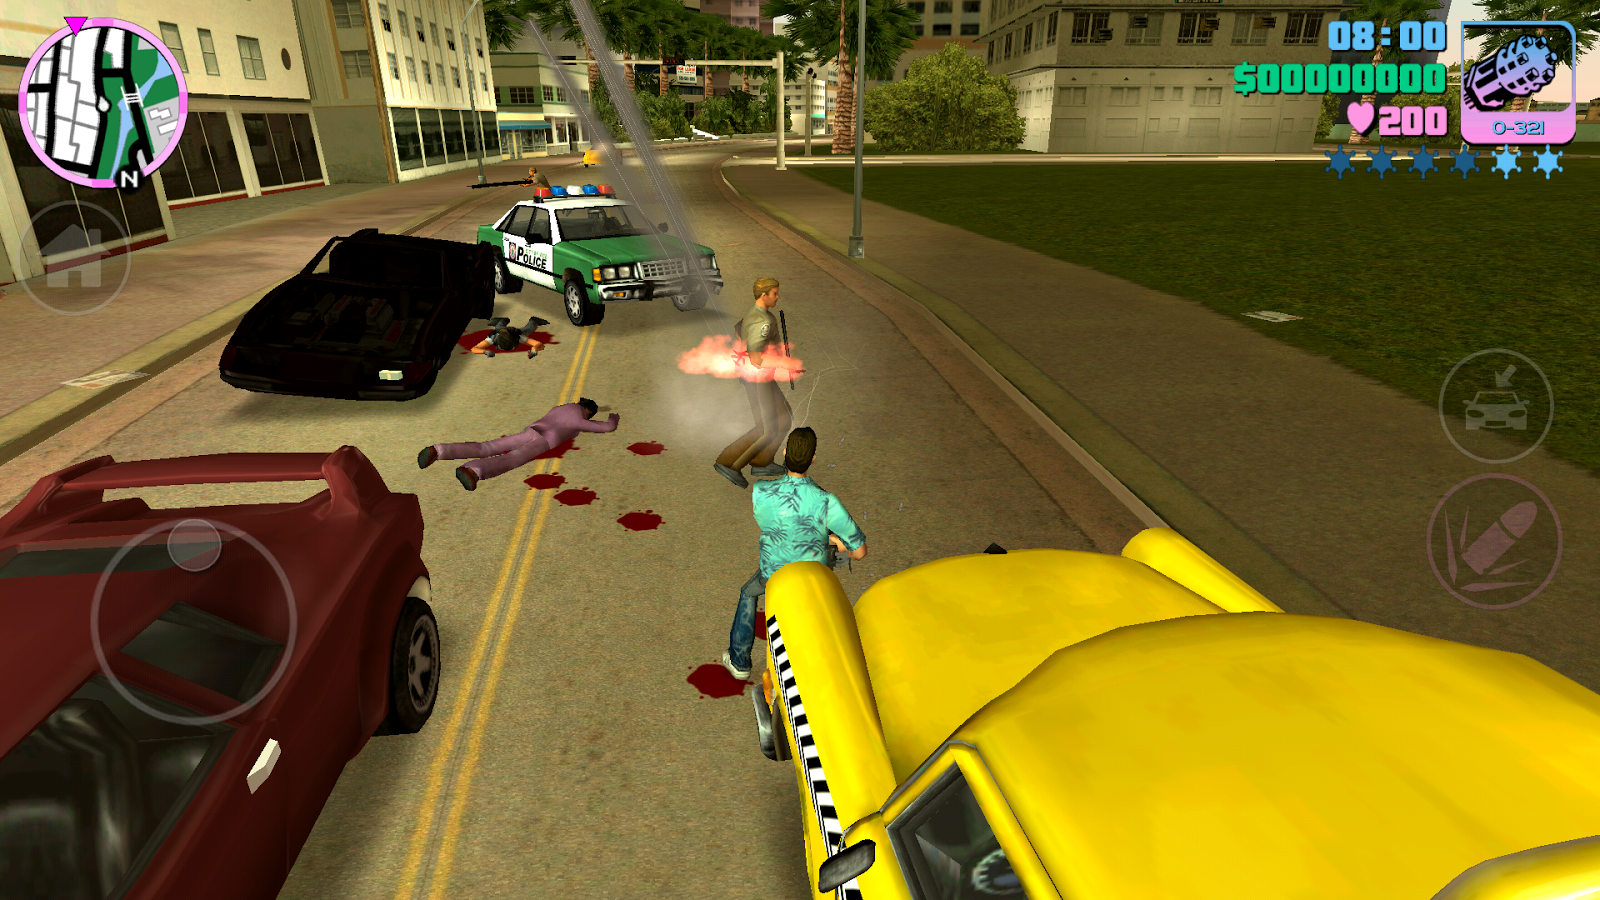 How download gta vice city for android mobile